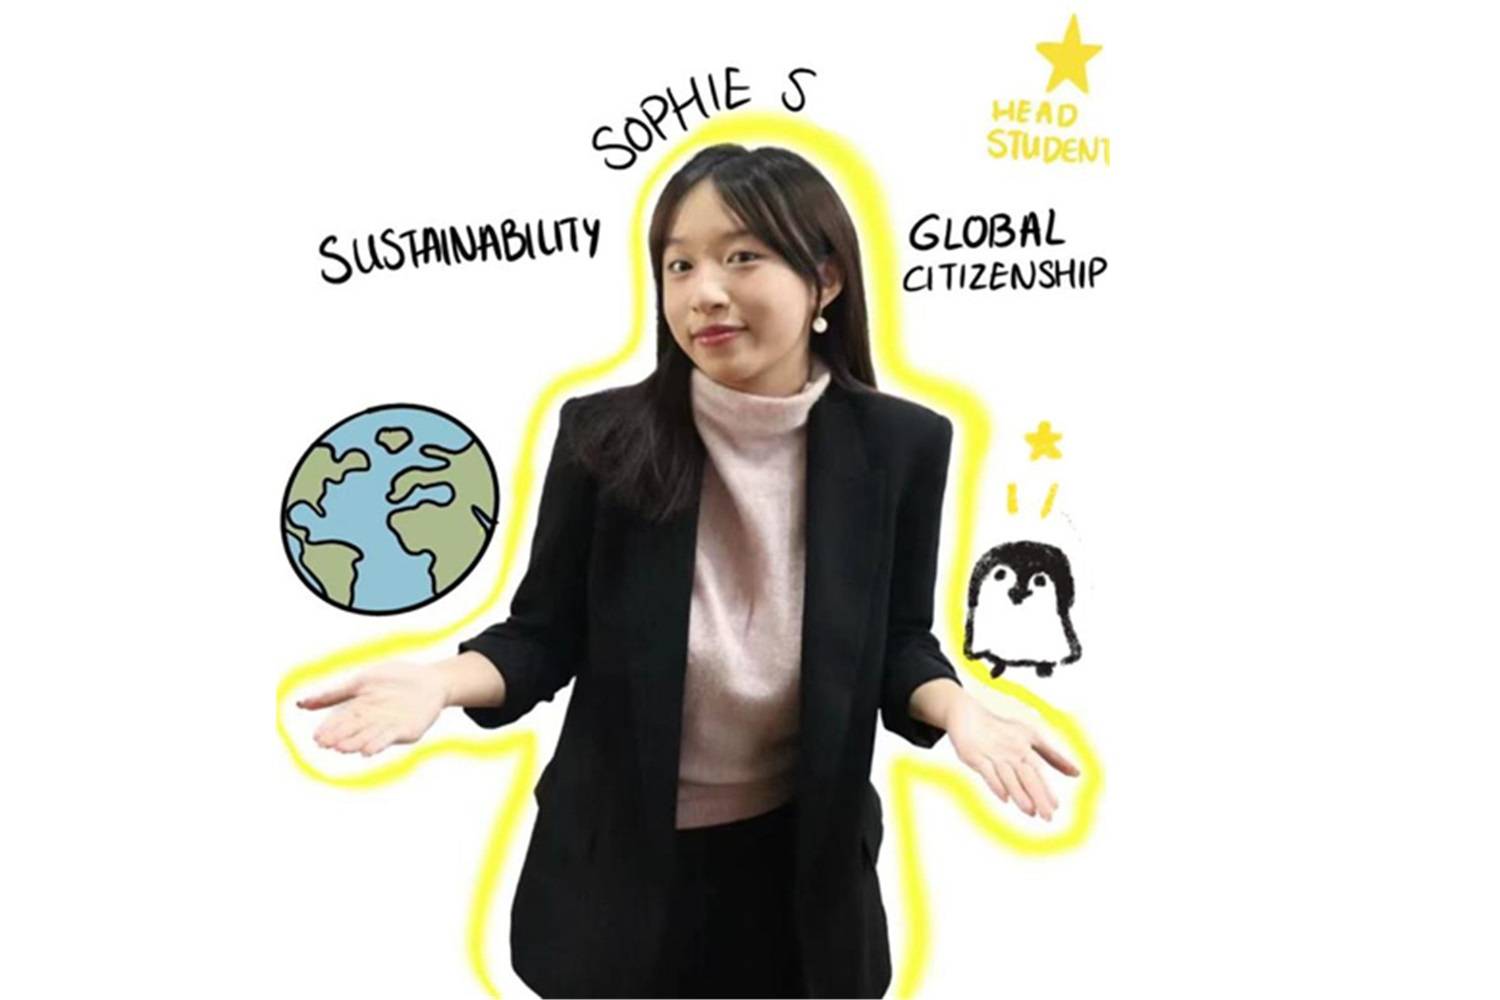 Head Prefect of Global Citizenship and Sustainability: Sophie S 